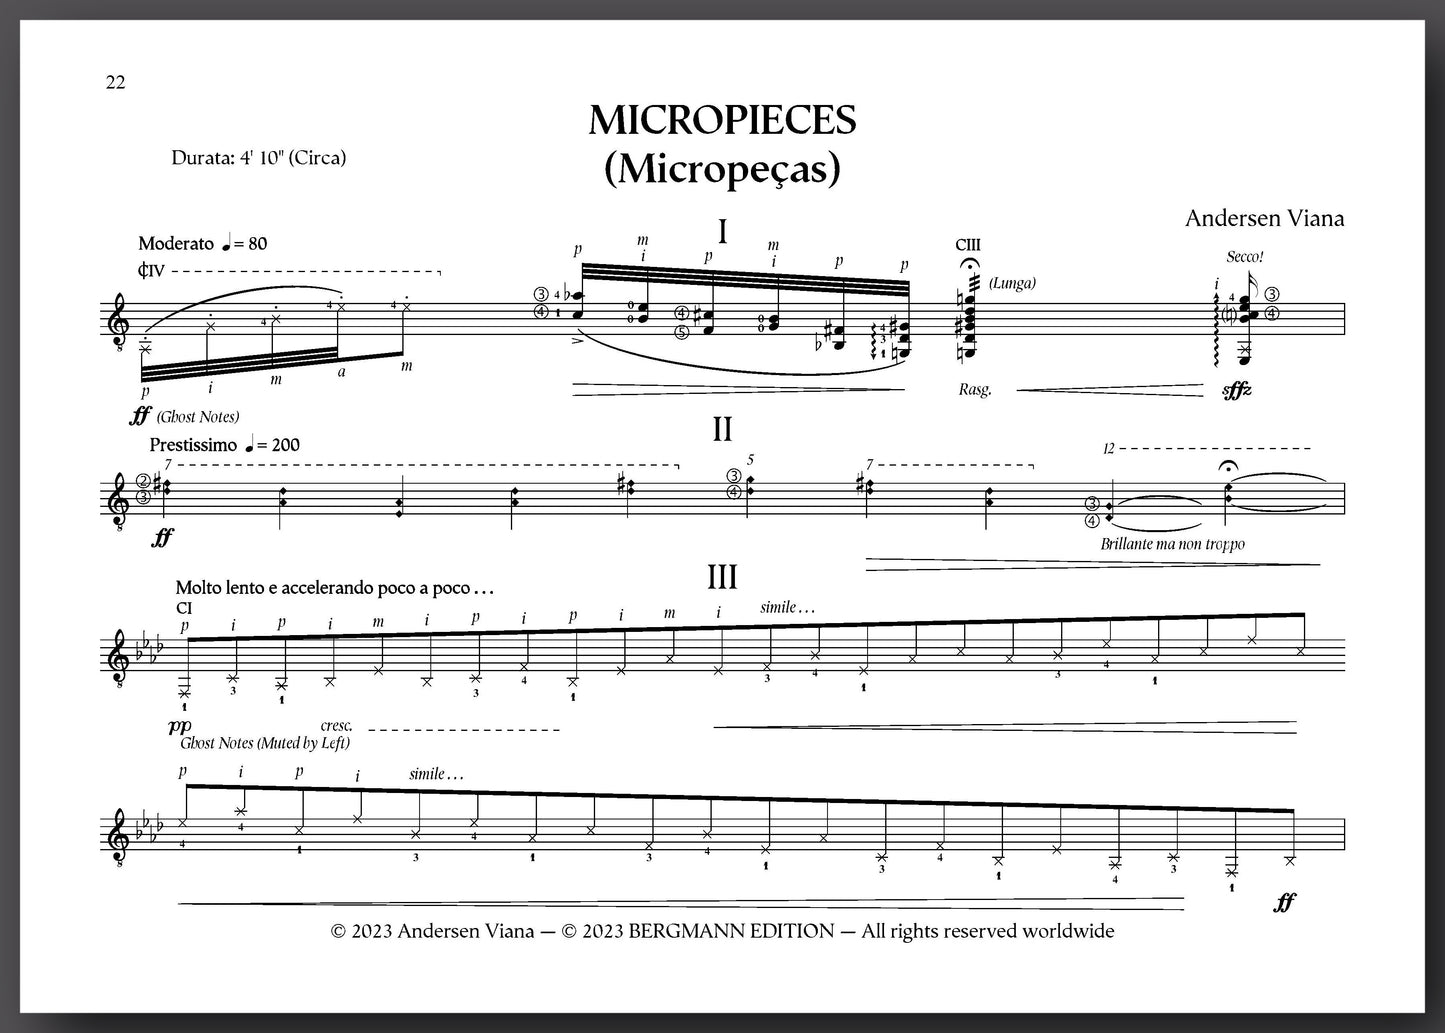 Micropieces by Andersen Viana - preview of the music score